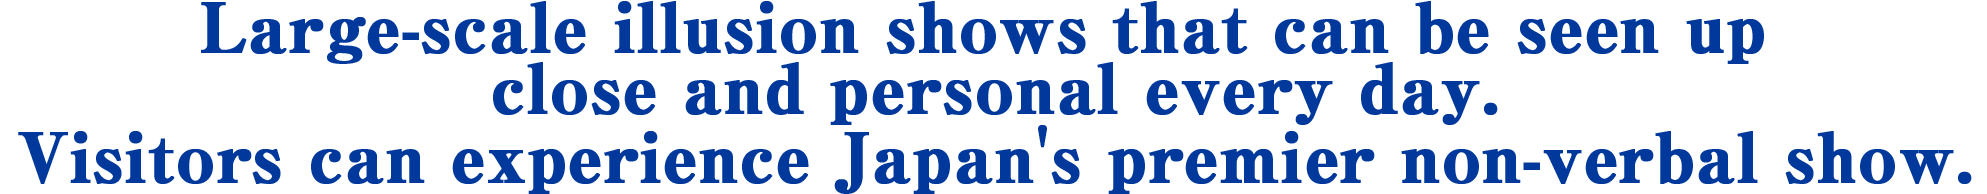 Large-scale illusion shows that can be seen up close and personal every day. Visitors can experience Japan' premier non-verbal show.